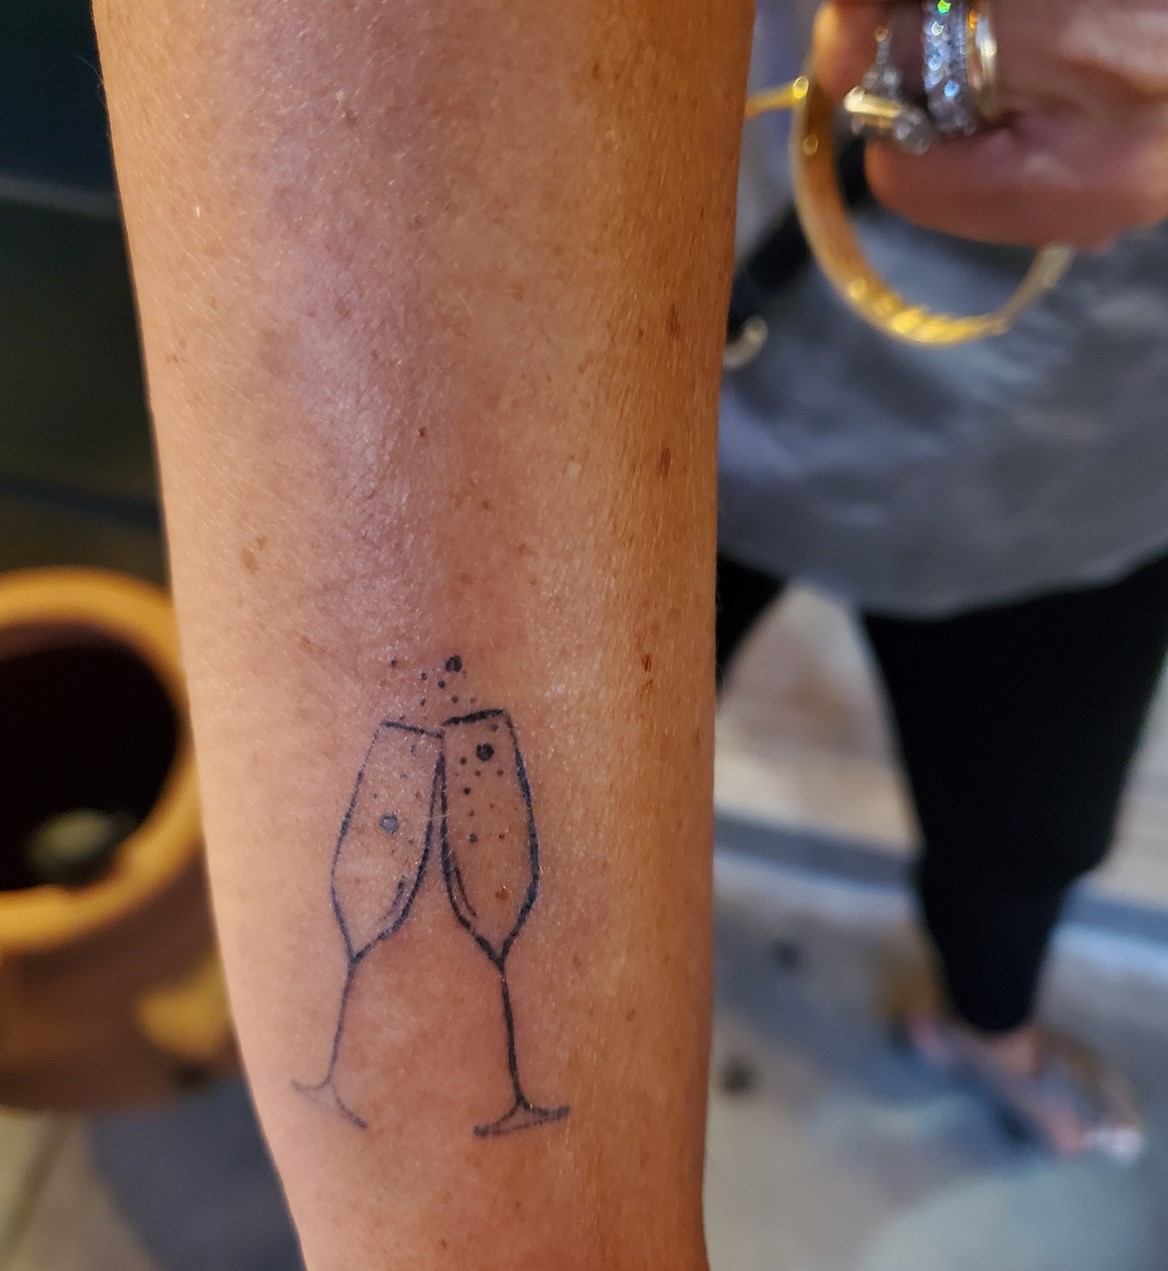 Tattoos From This FirstEver Miami Shop Are Designed to Disappear